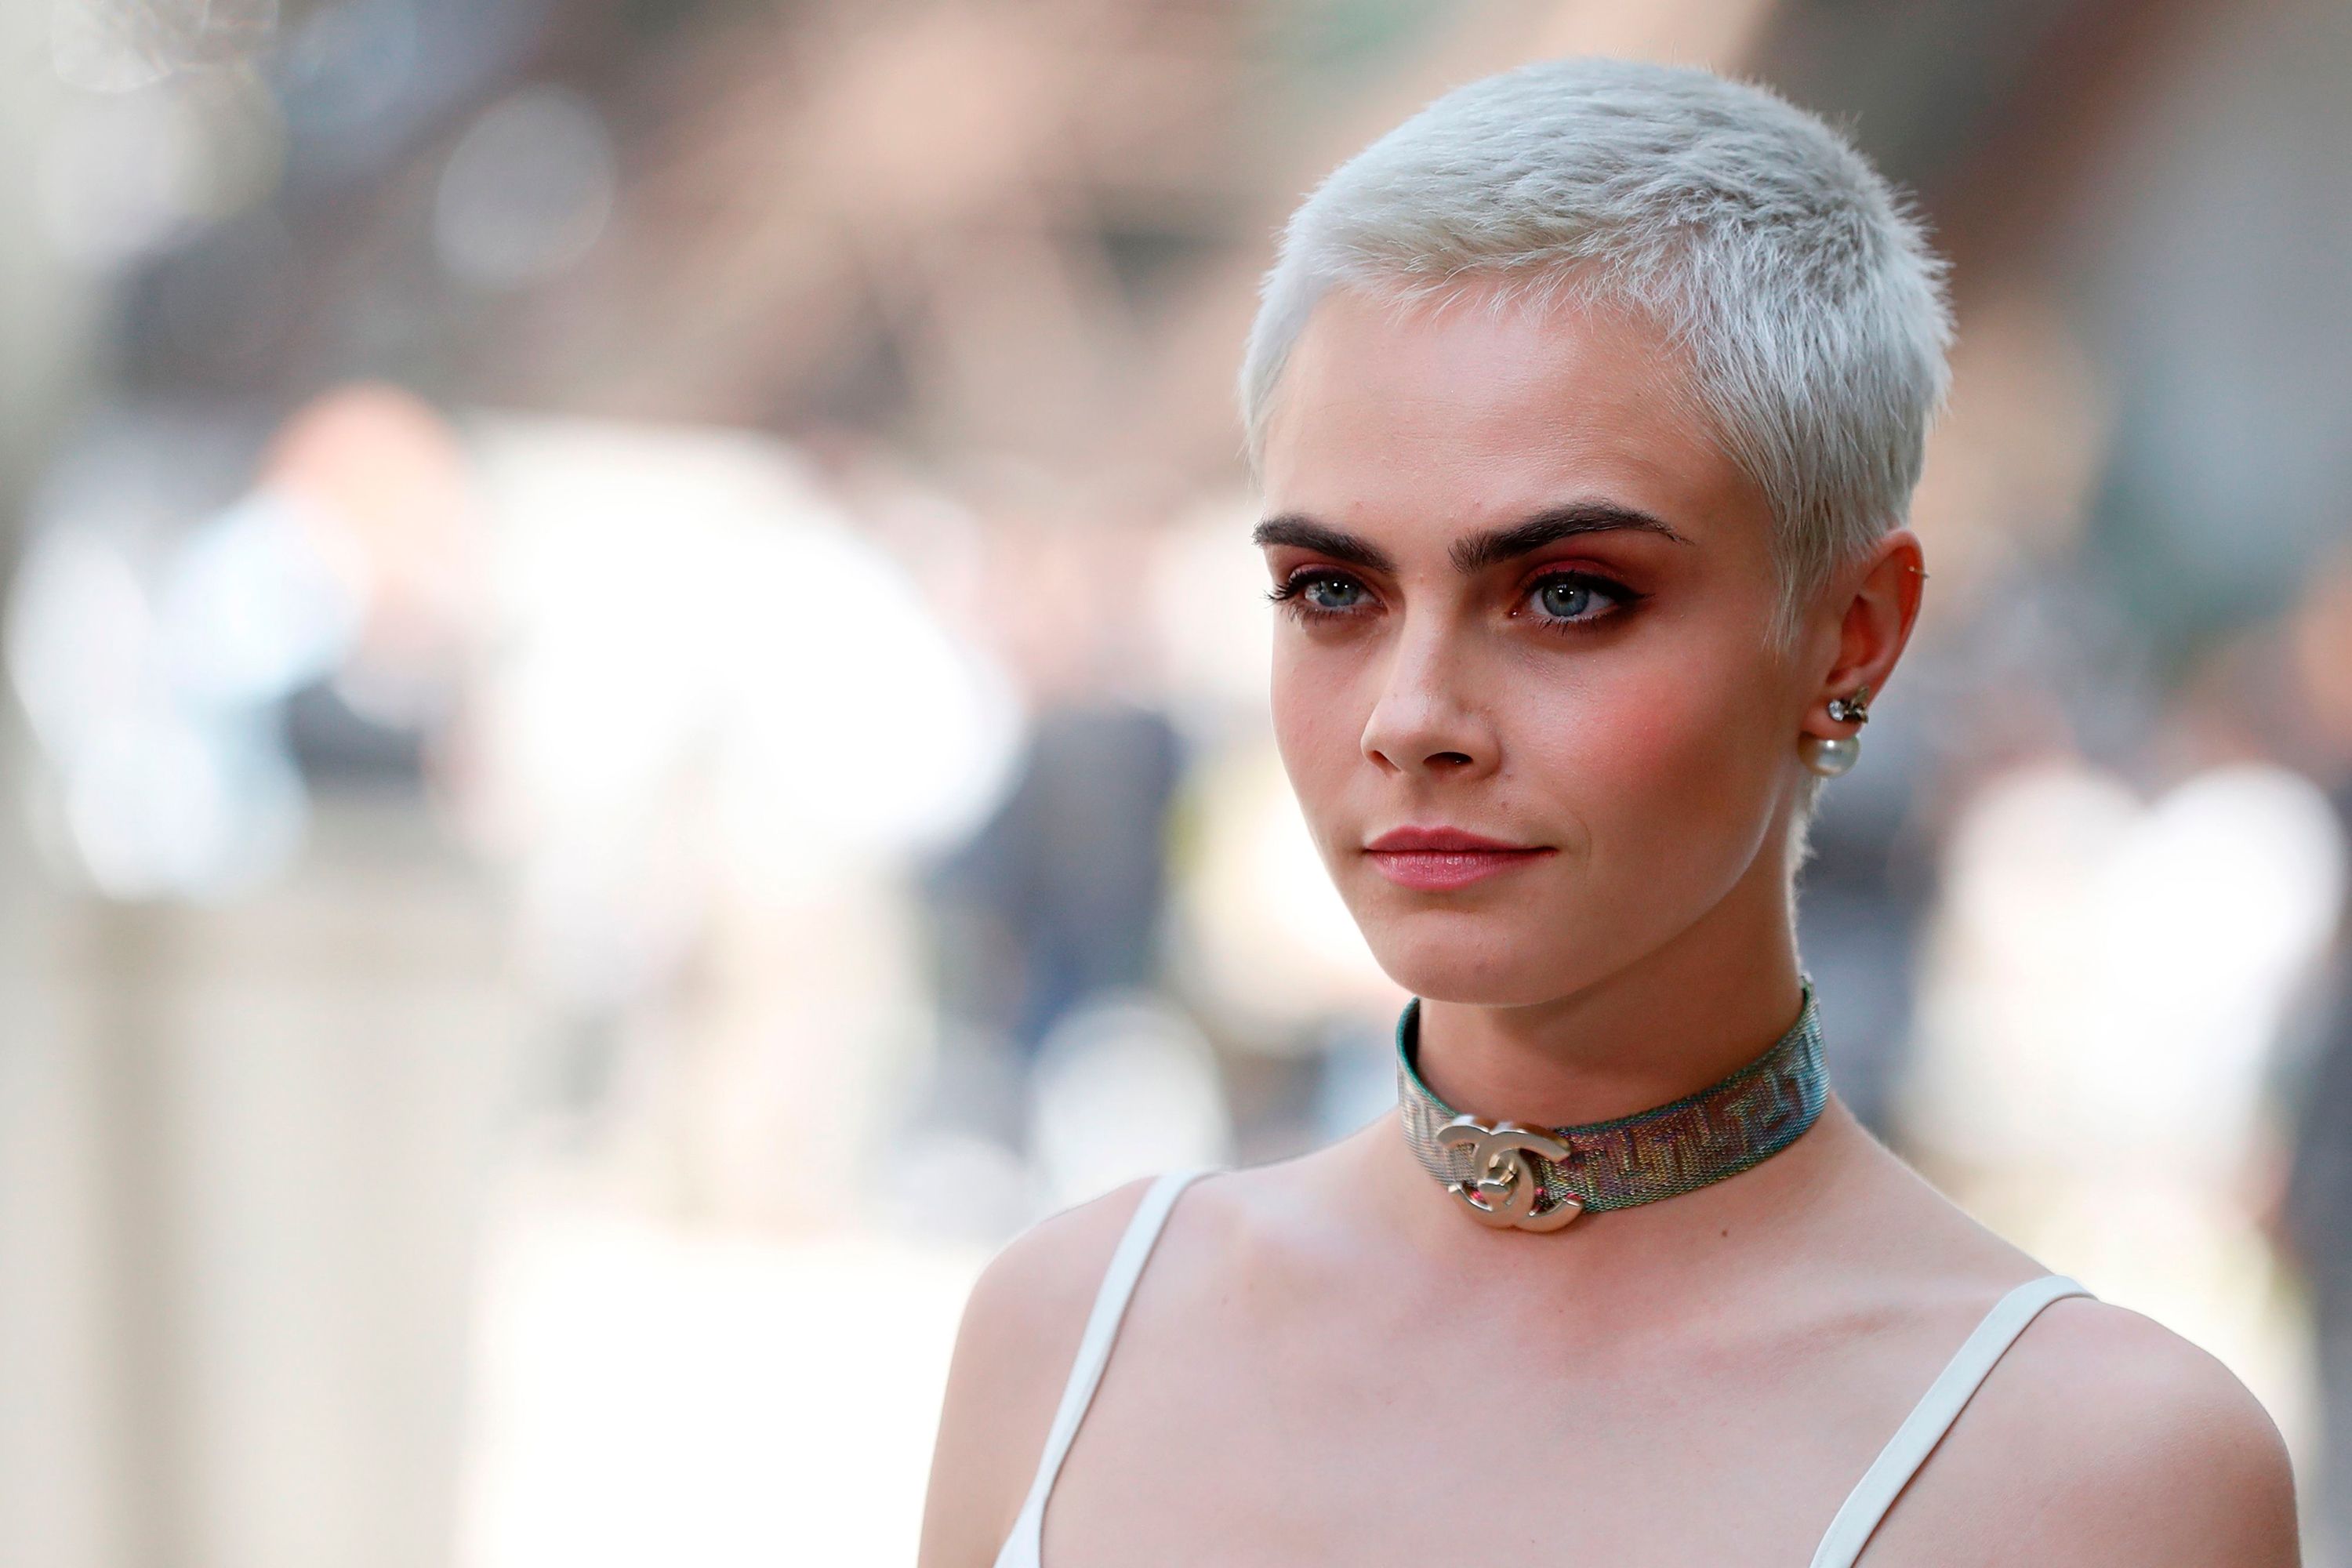 Why Cara Delevingne shaved her hair